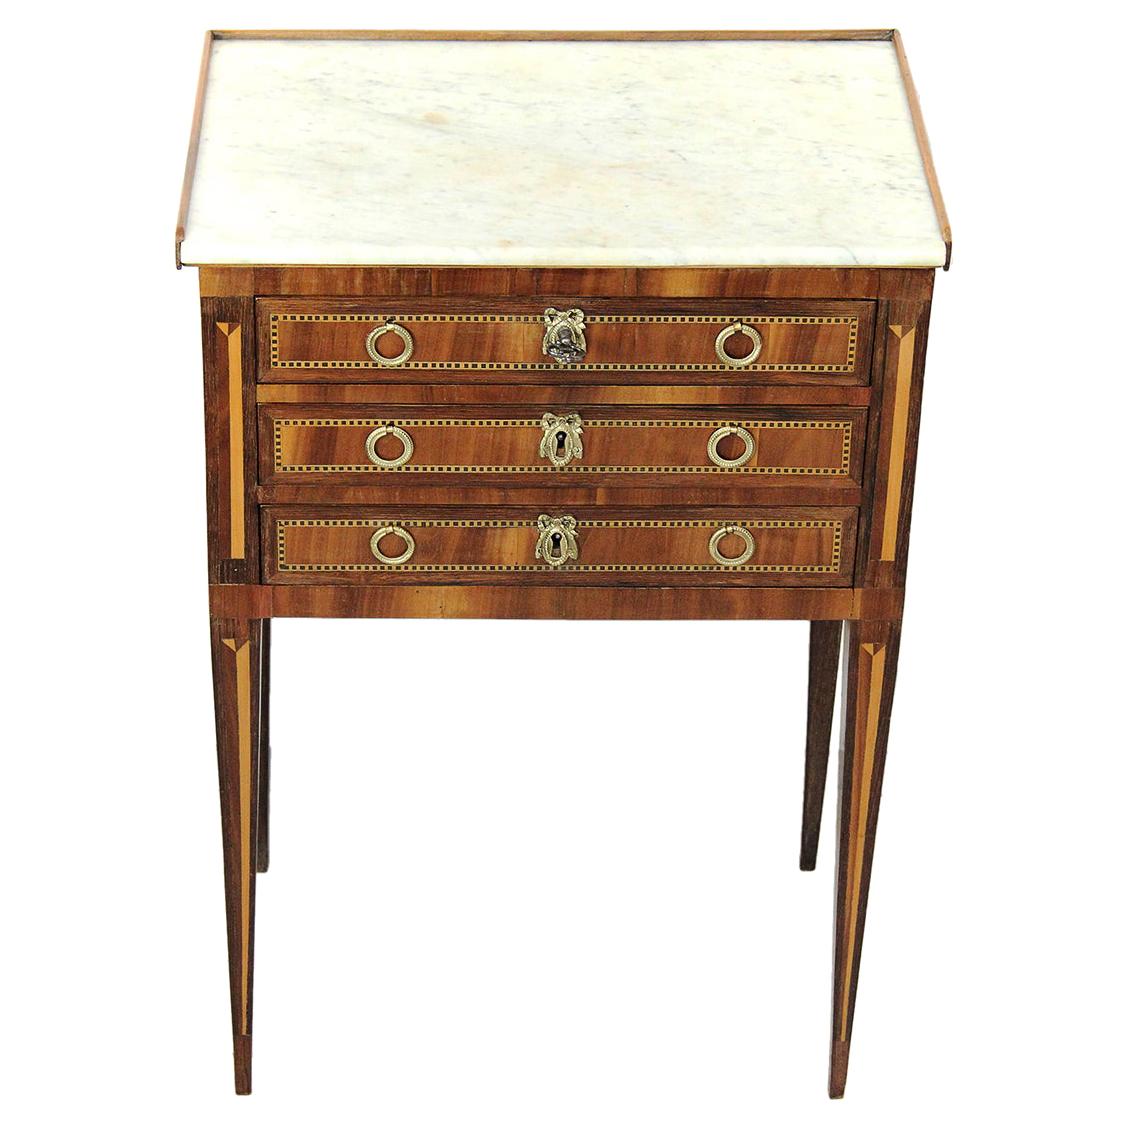 18th Century Little Chest Louis XVI Period Rosewood Marquetry and White Marble